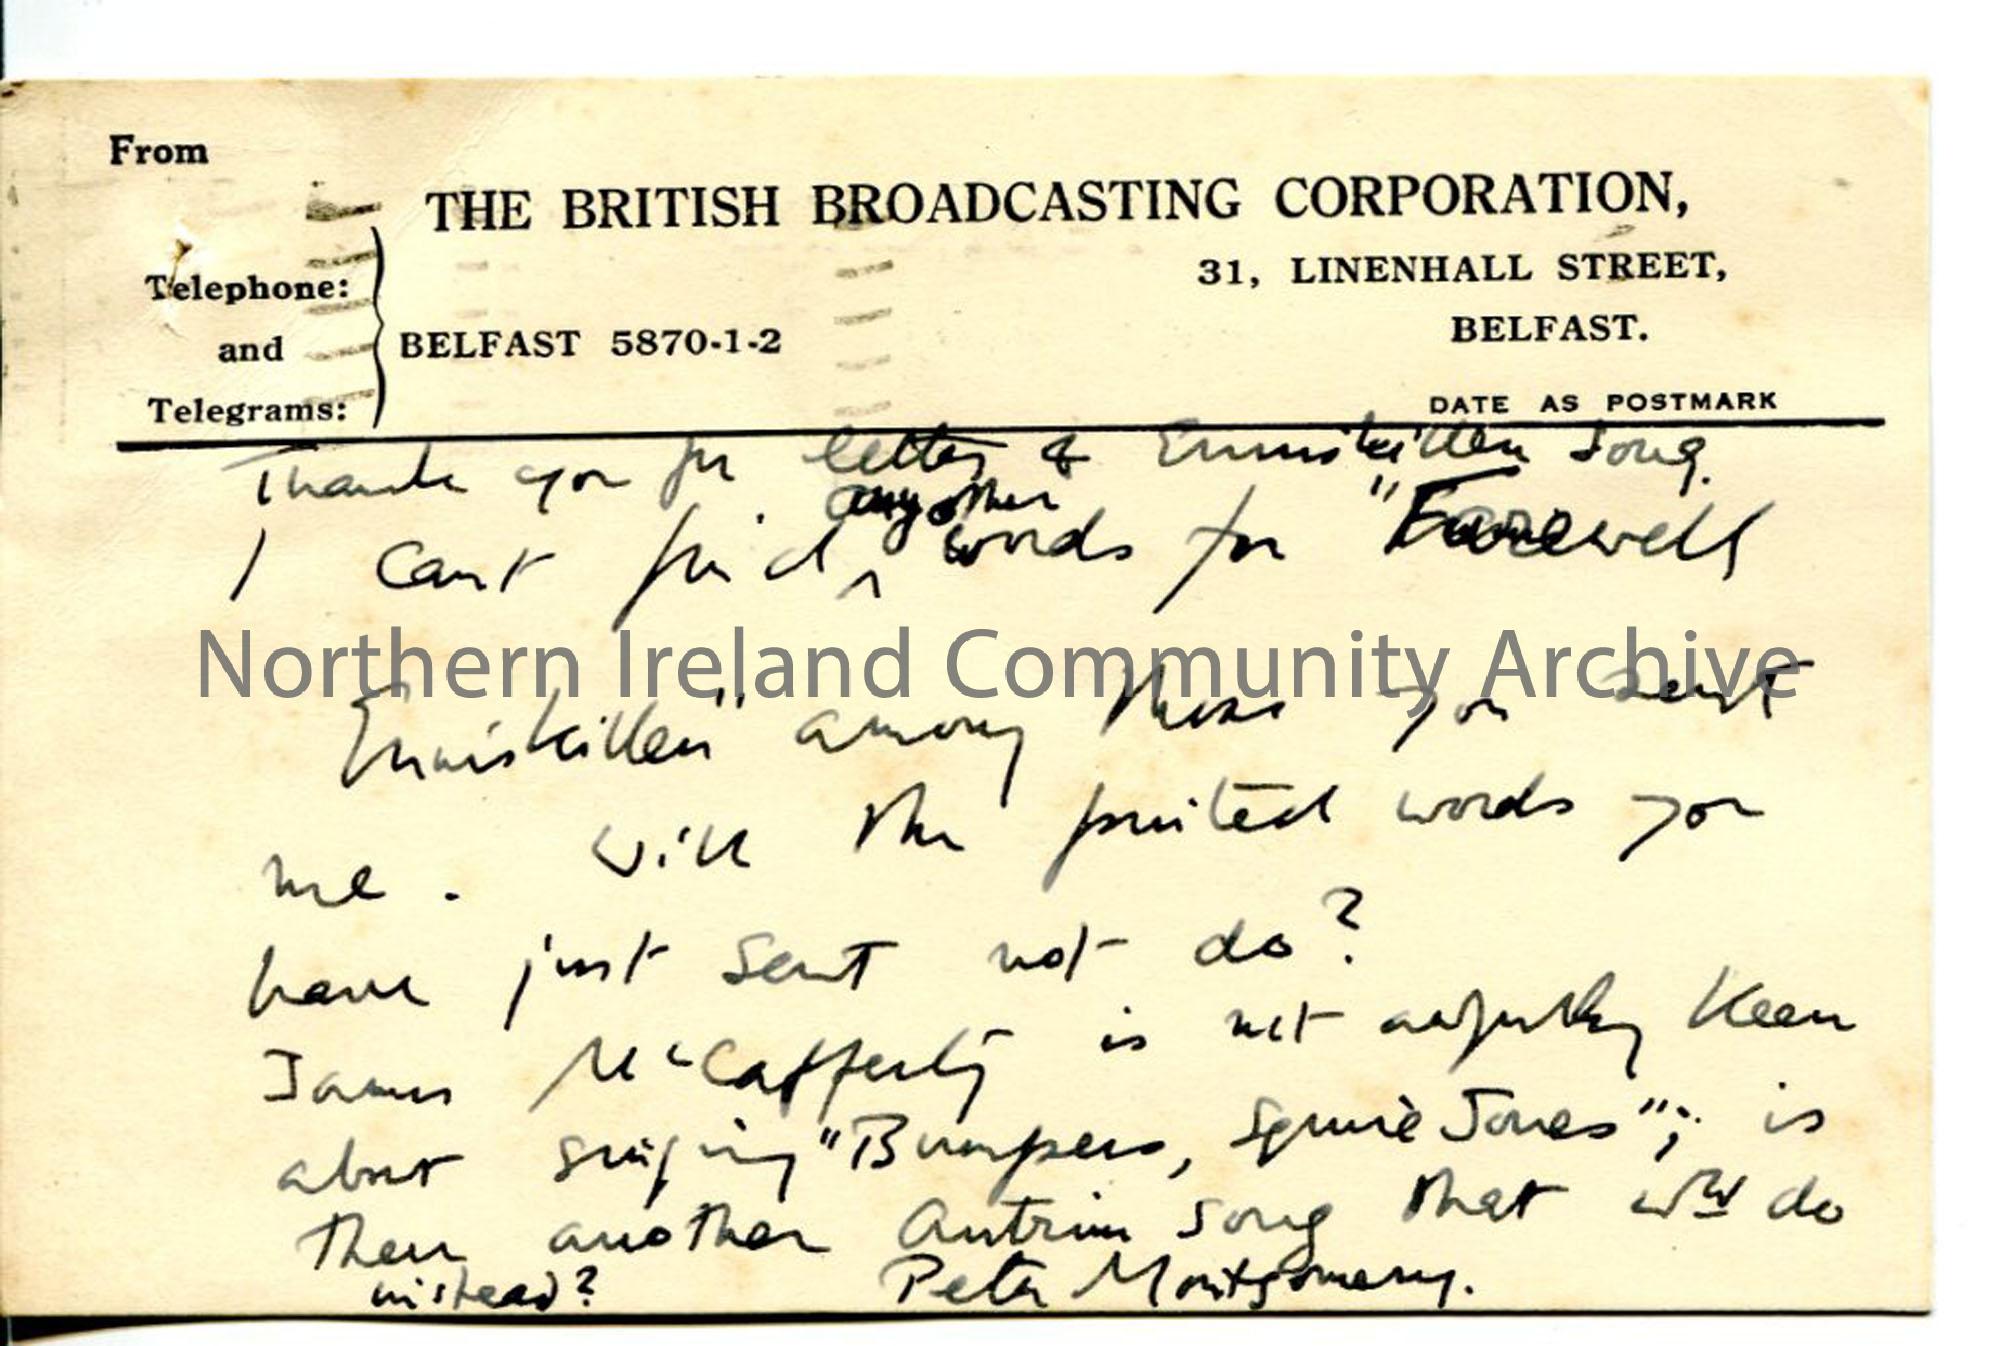 Postcard from Peter Montgomery of the BBC, dated 15.11.1934